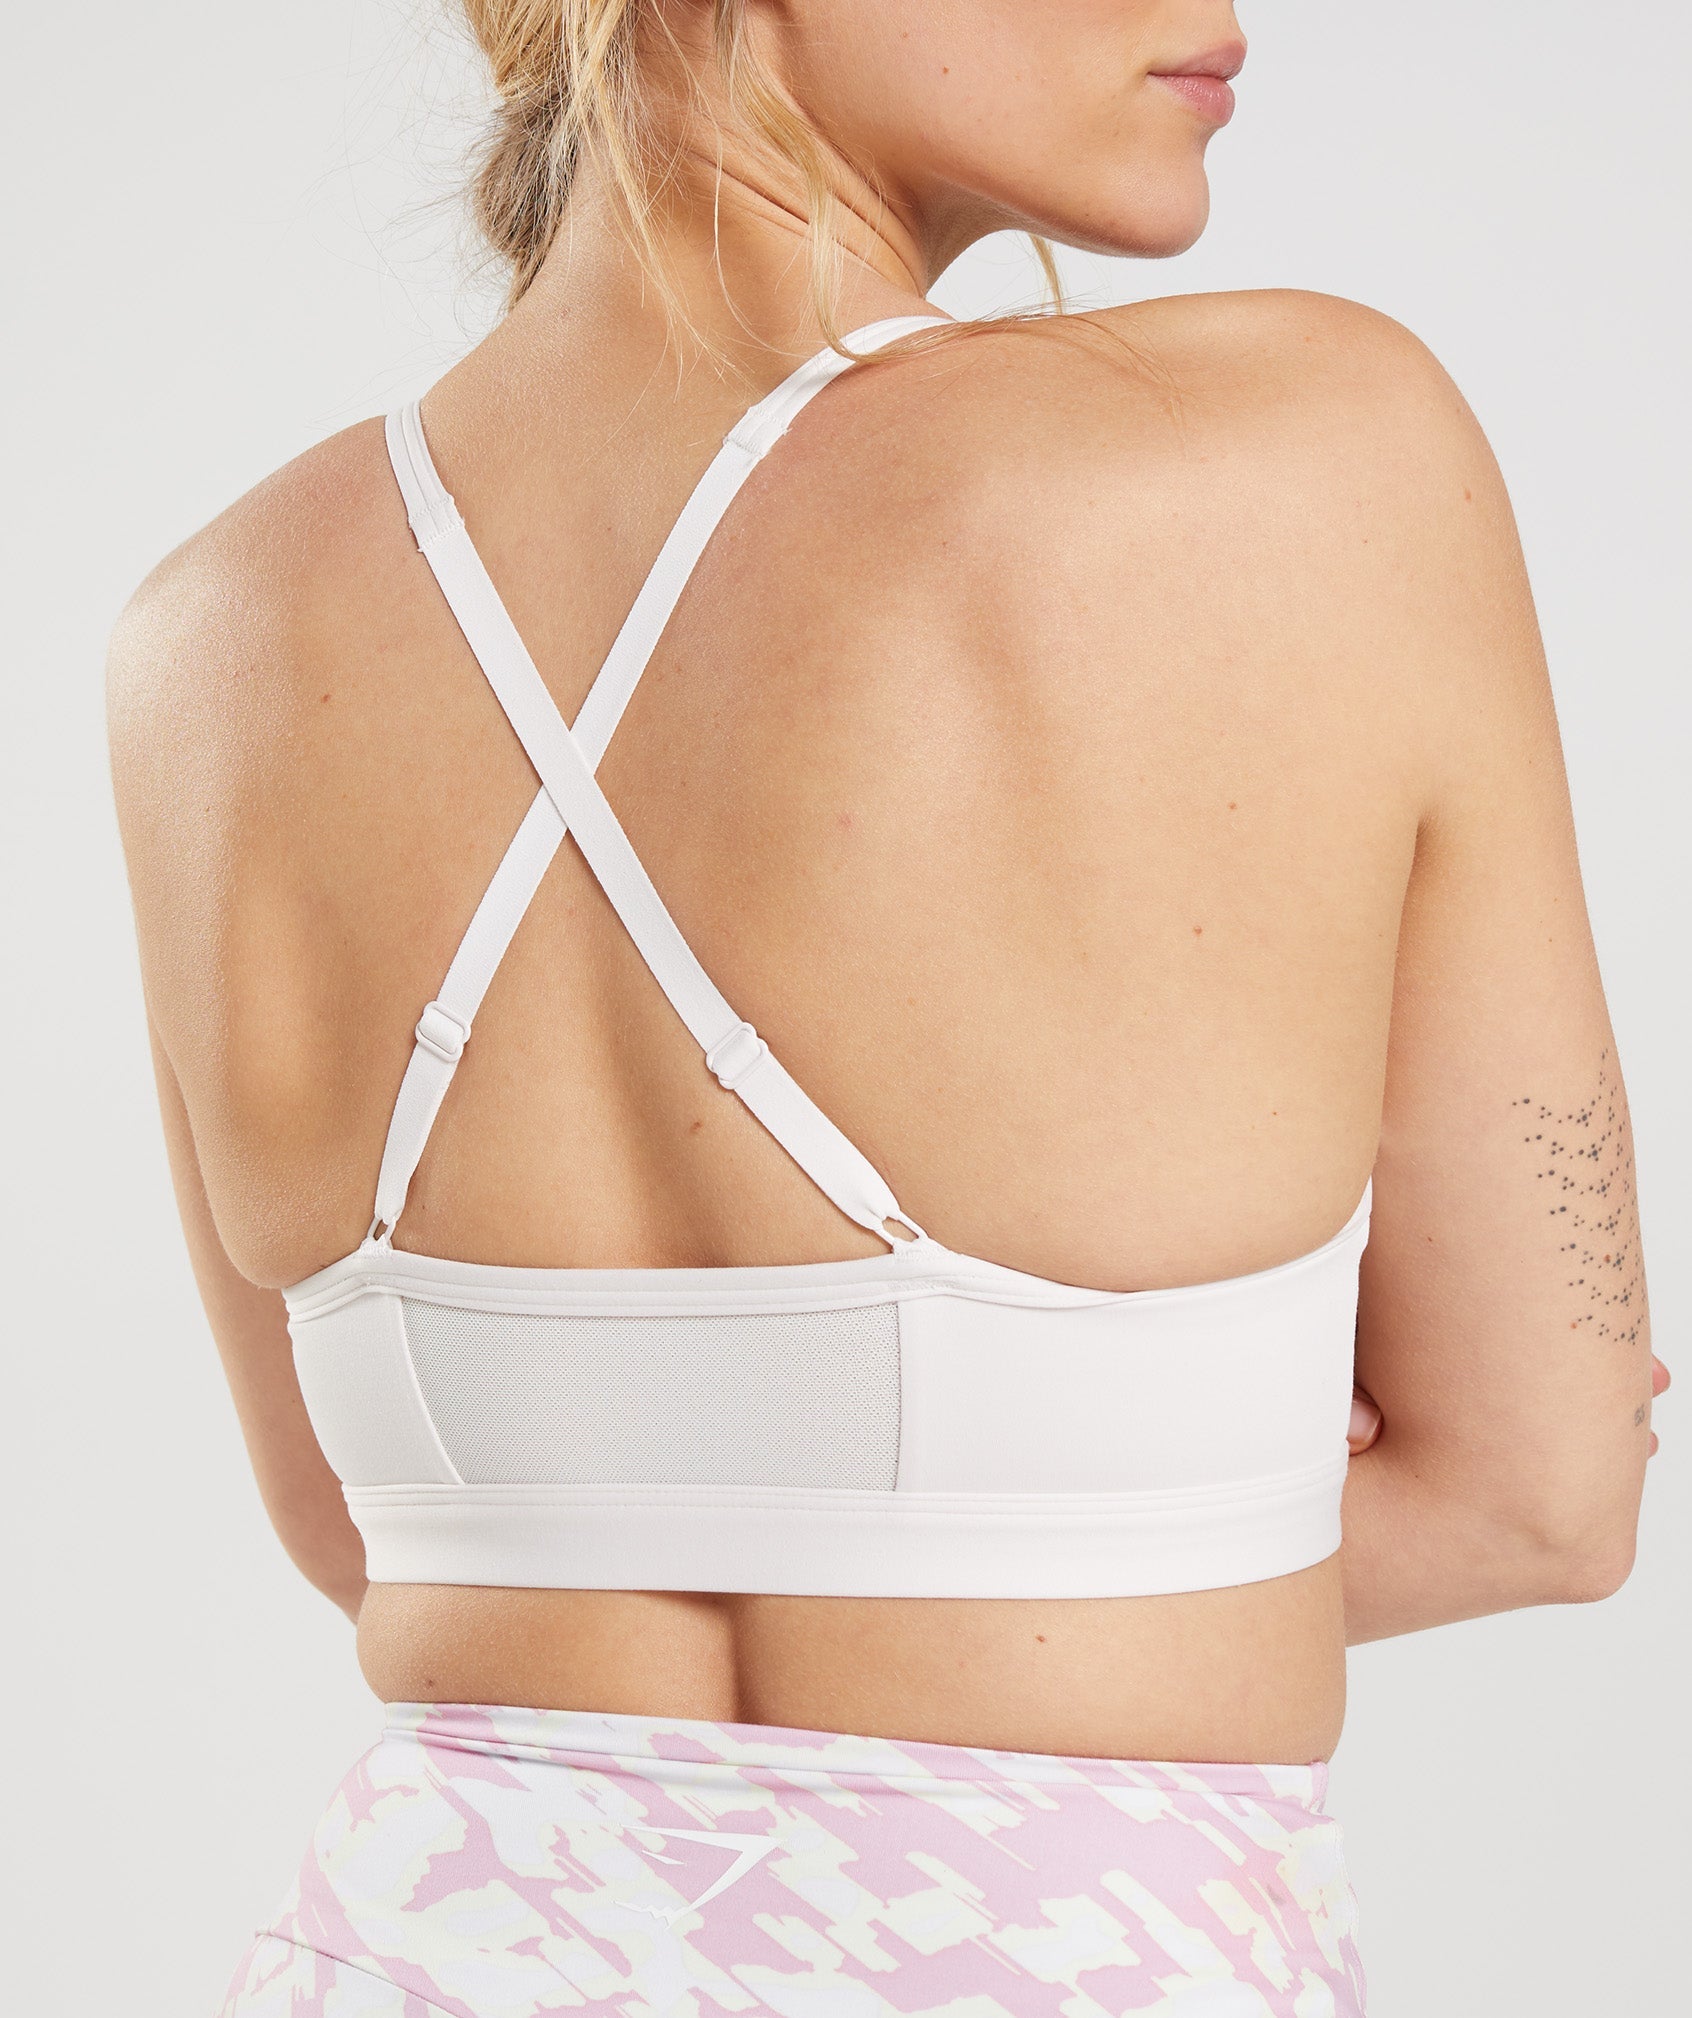 Ruched Sports Bra in Coconut White - view 6